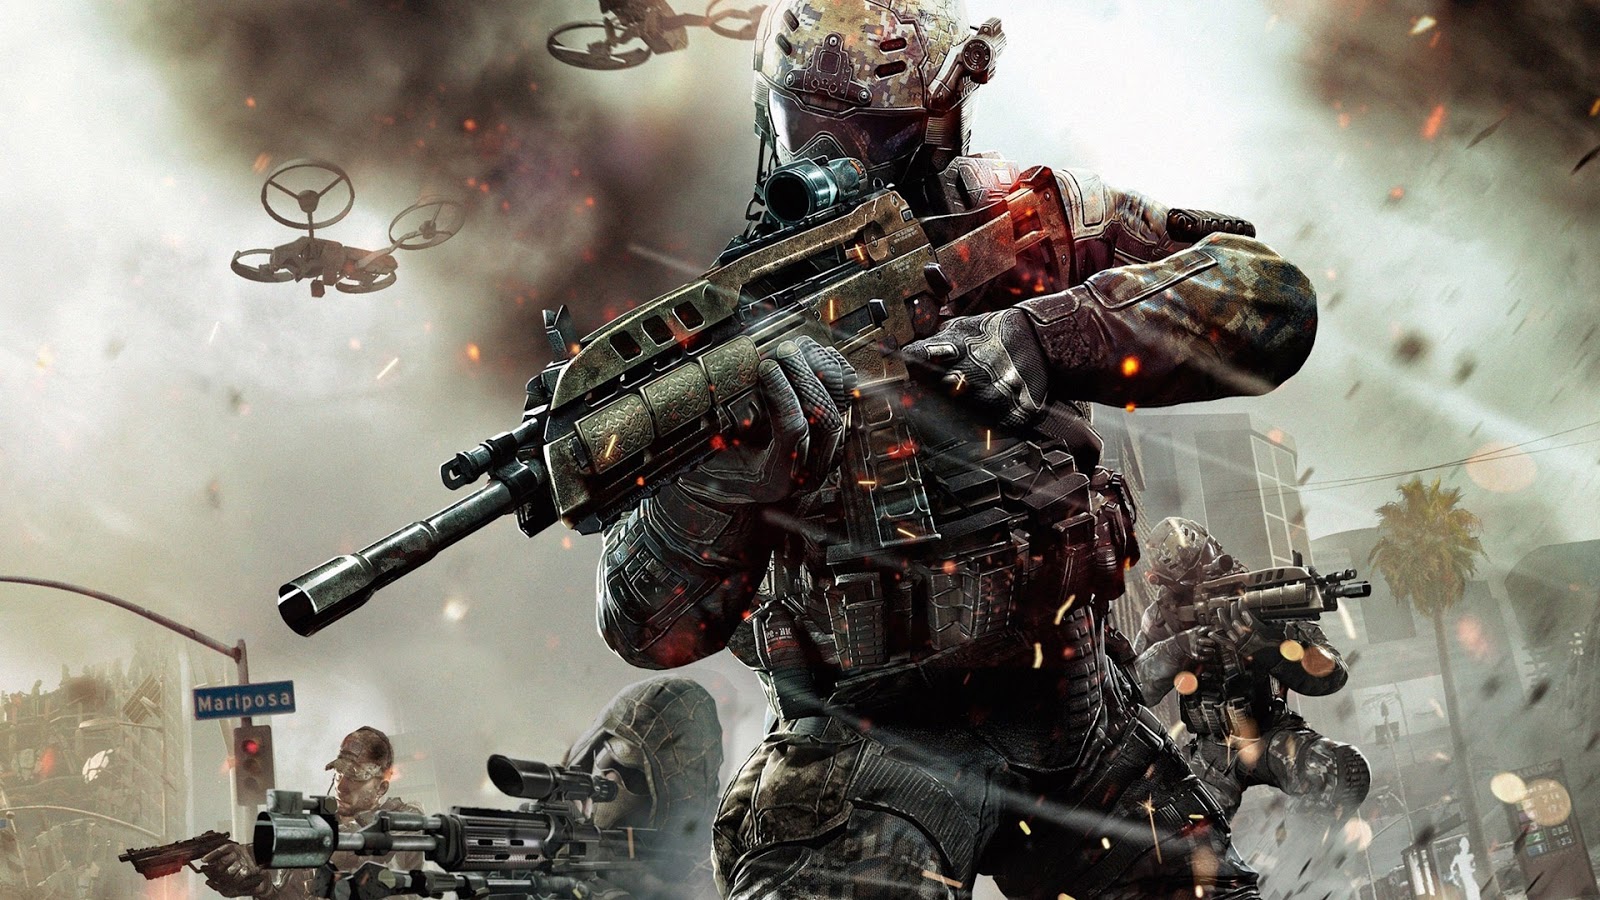 call of duty wallpaper hd,action adventure game,shooter game,pc game,strategy video game,games